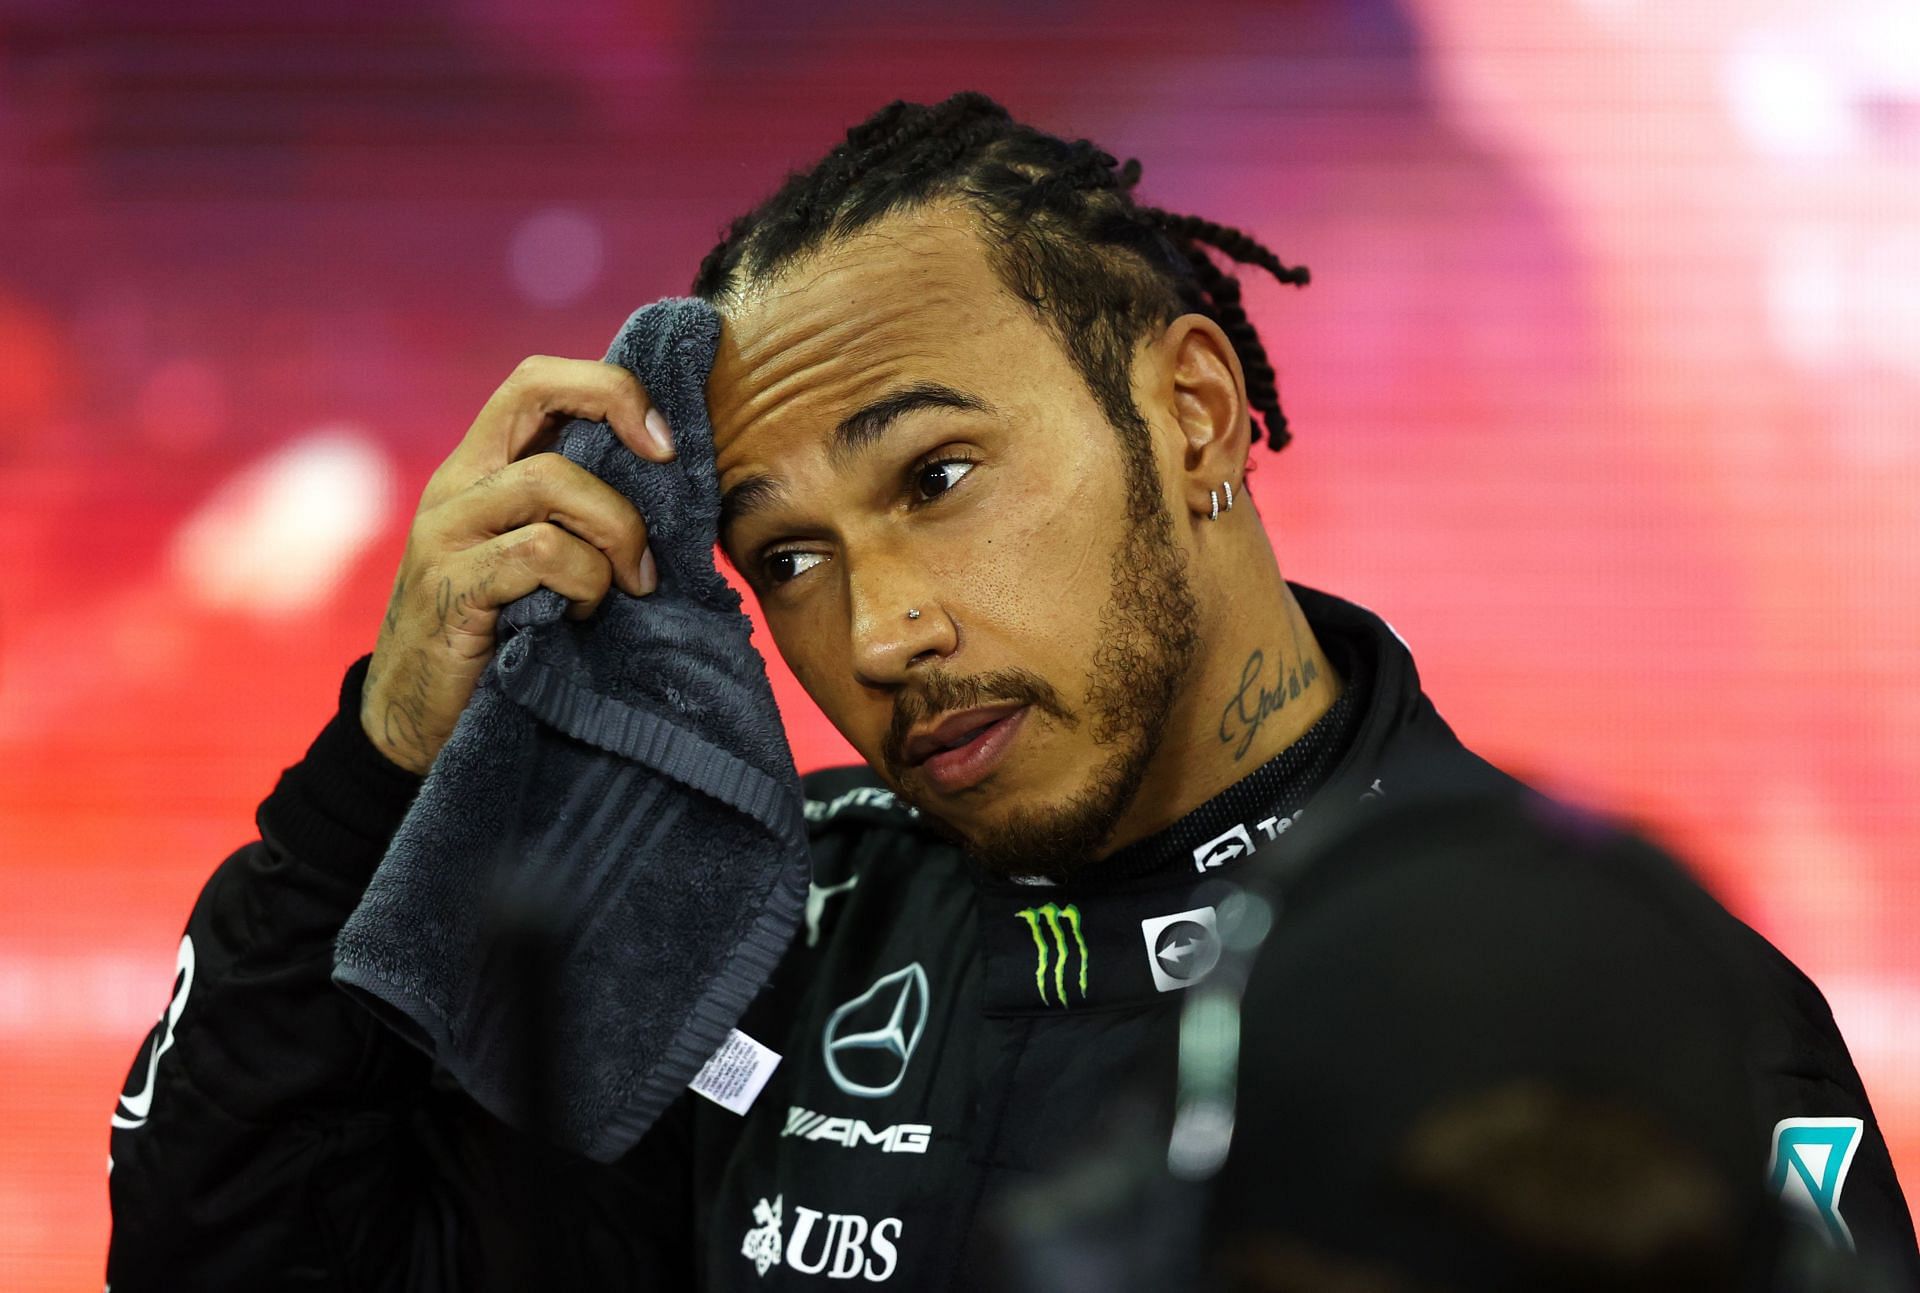 Lewis Hamilton produced yet another stellar season in 2021